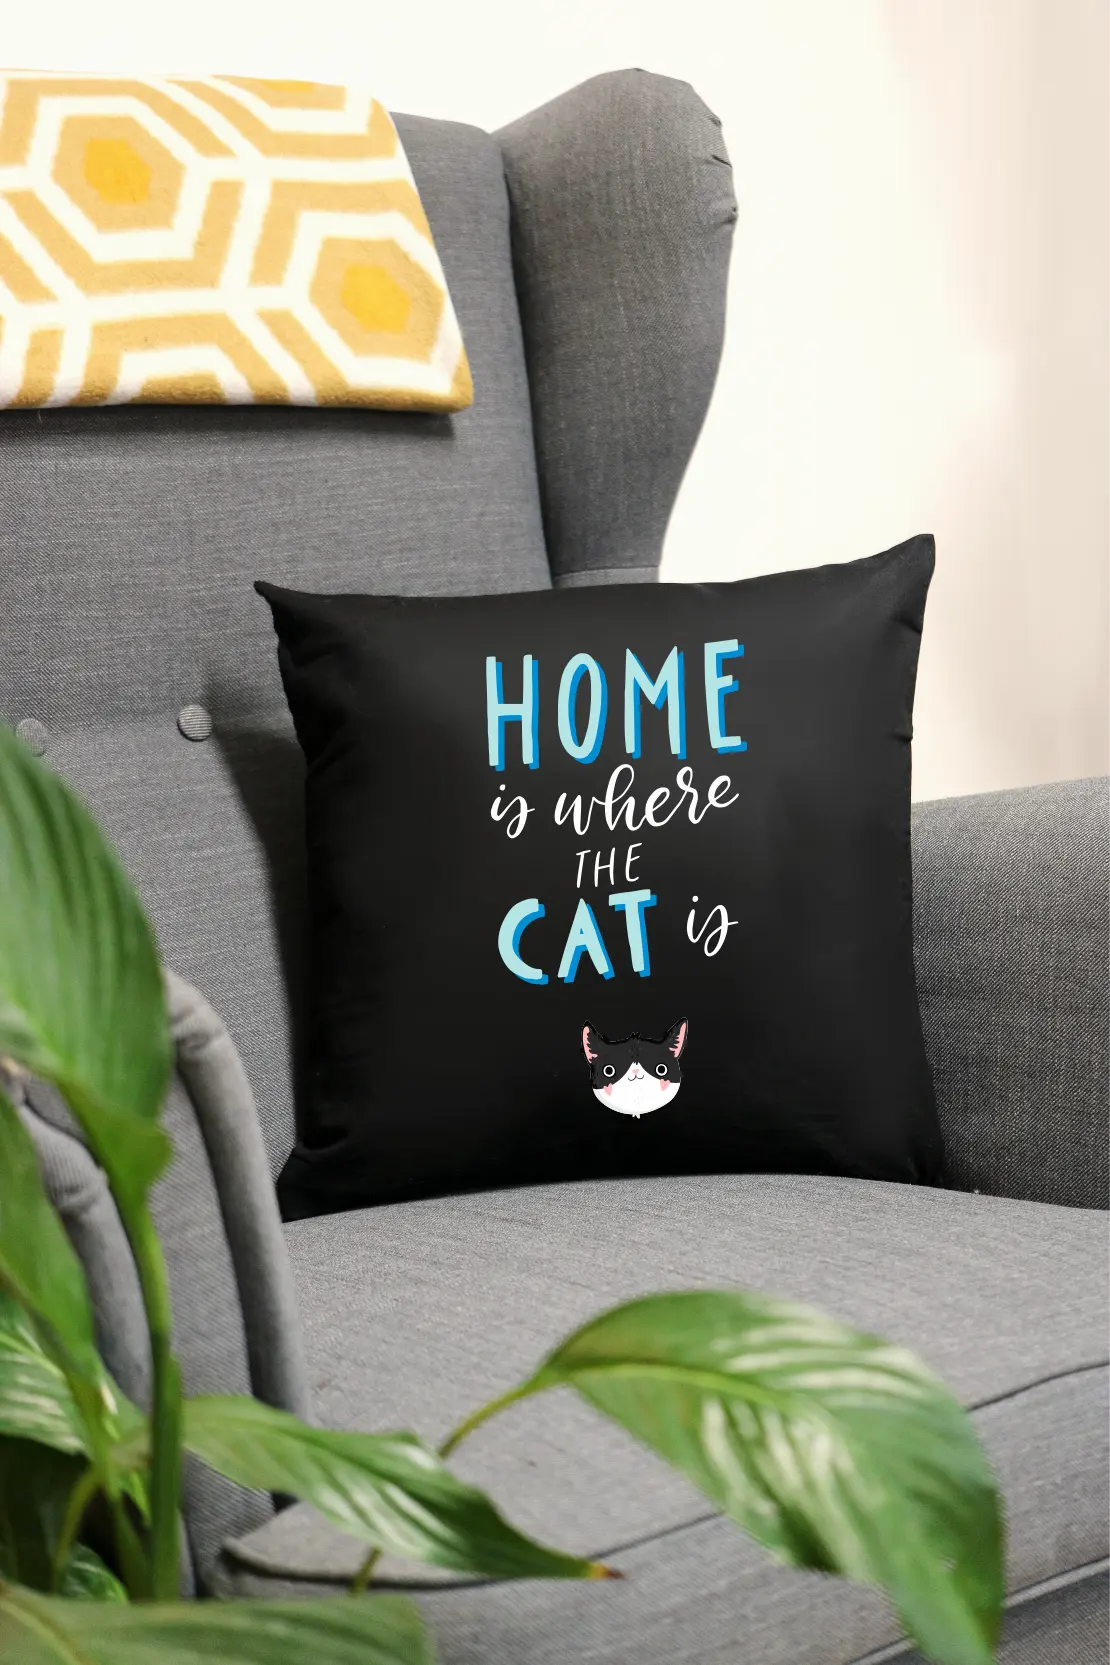 Home is where the cat is | Polster/Kissen      